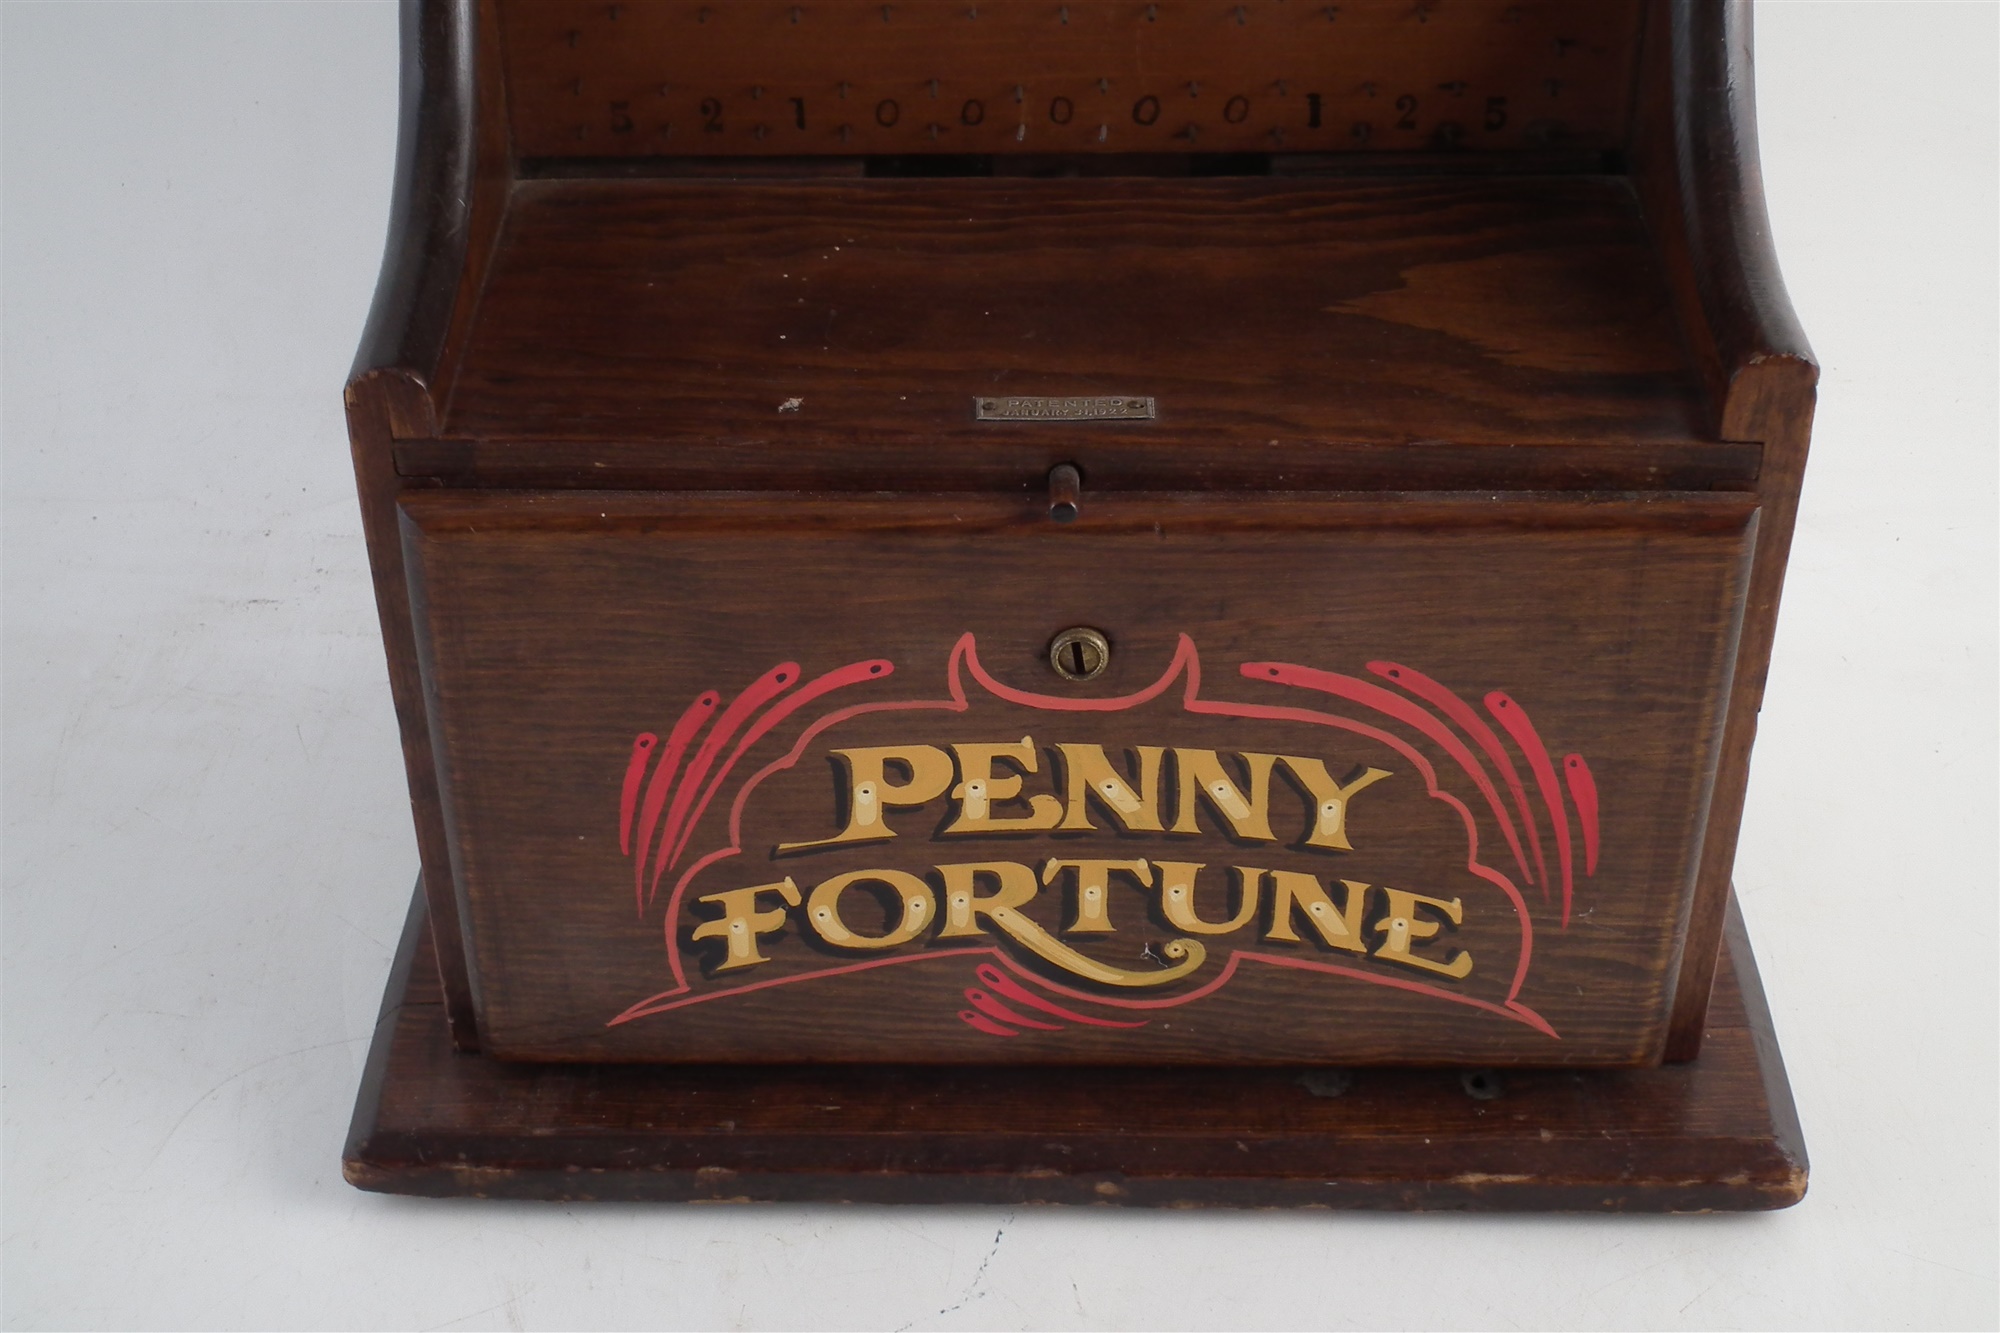 Penny Fortune drop game, applied 1922 patent metal label, with key, 56cm high The game appears to - Image 2 of 7